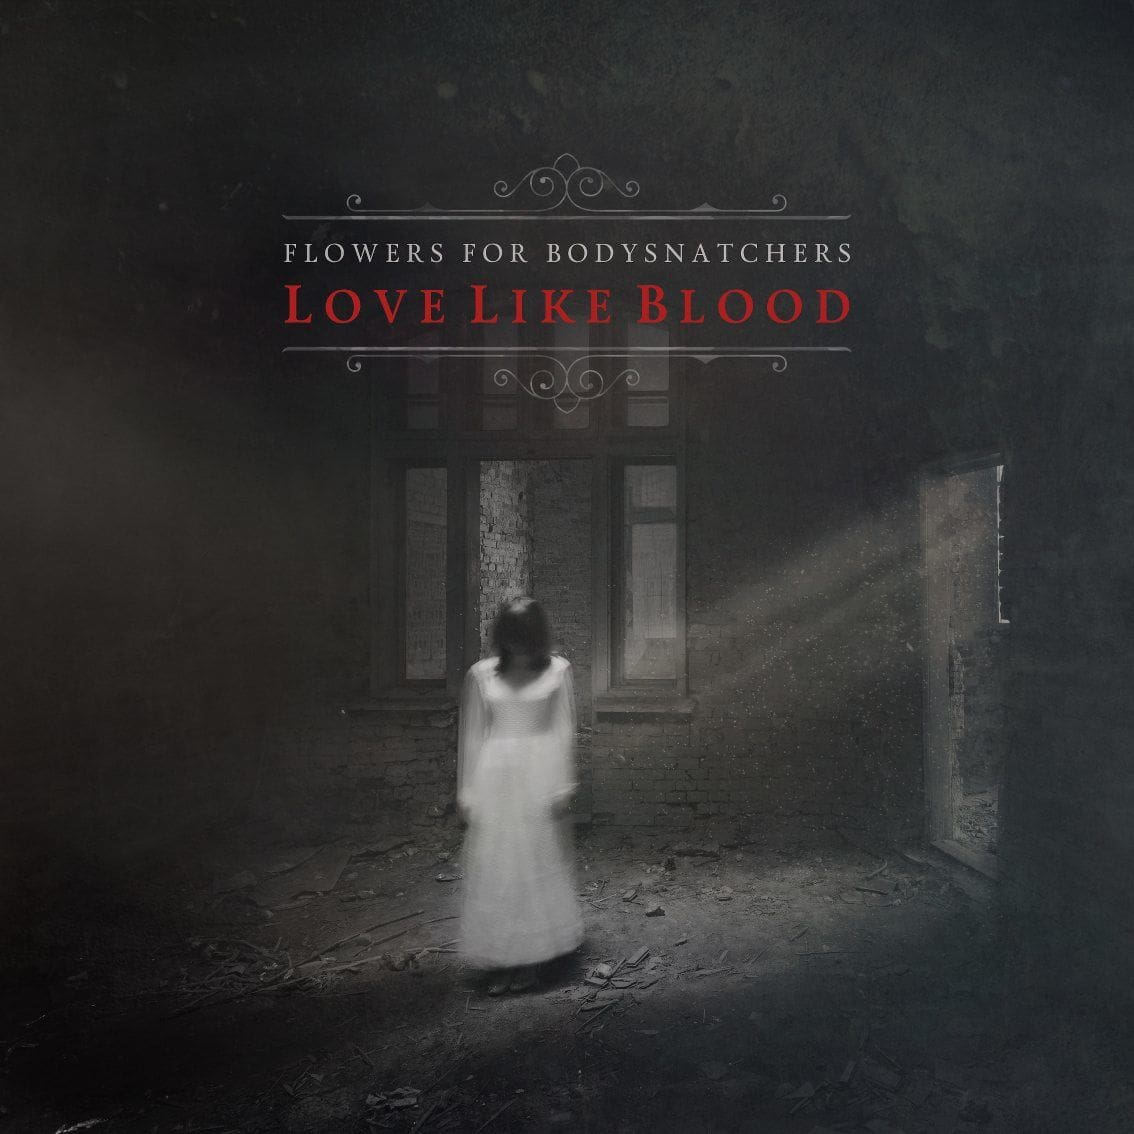 Cryo Chamber releases the Flowers for Bodysnatchers album 'Love Like Blood' + offers free shipping on all U.S. orders